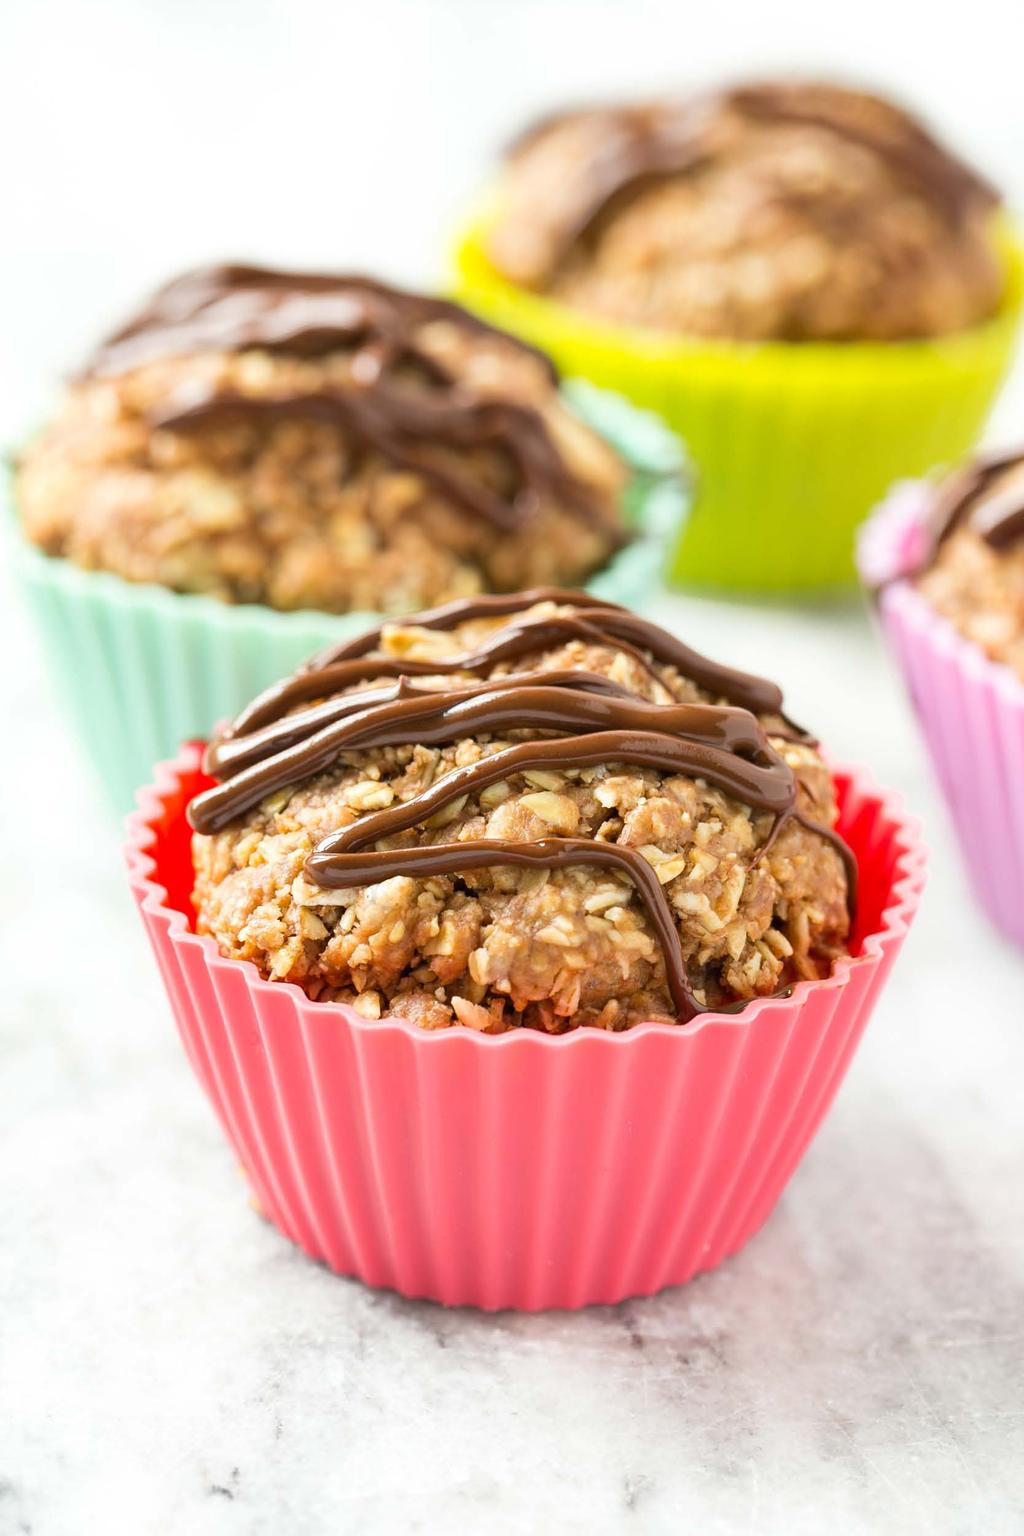 12. Protein Breakfast Cupcakes Make a batch of these energy cupcakes in advance and grab one each morning on your way out the door!